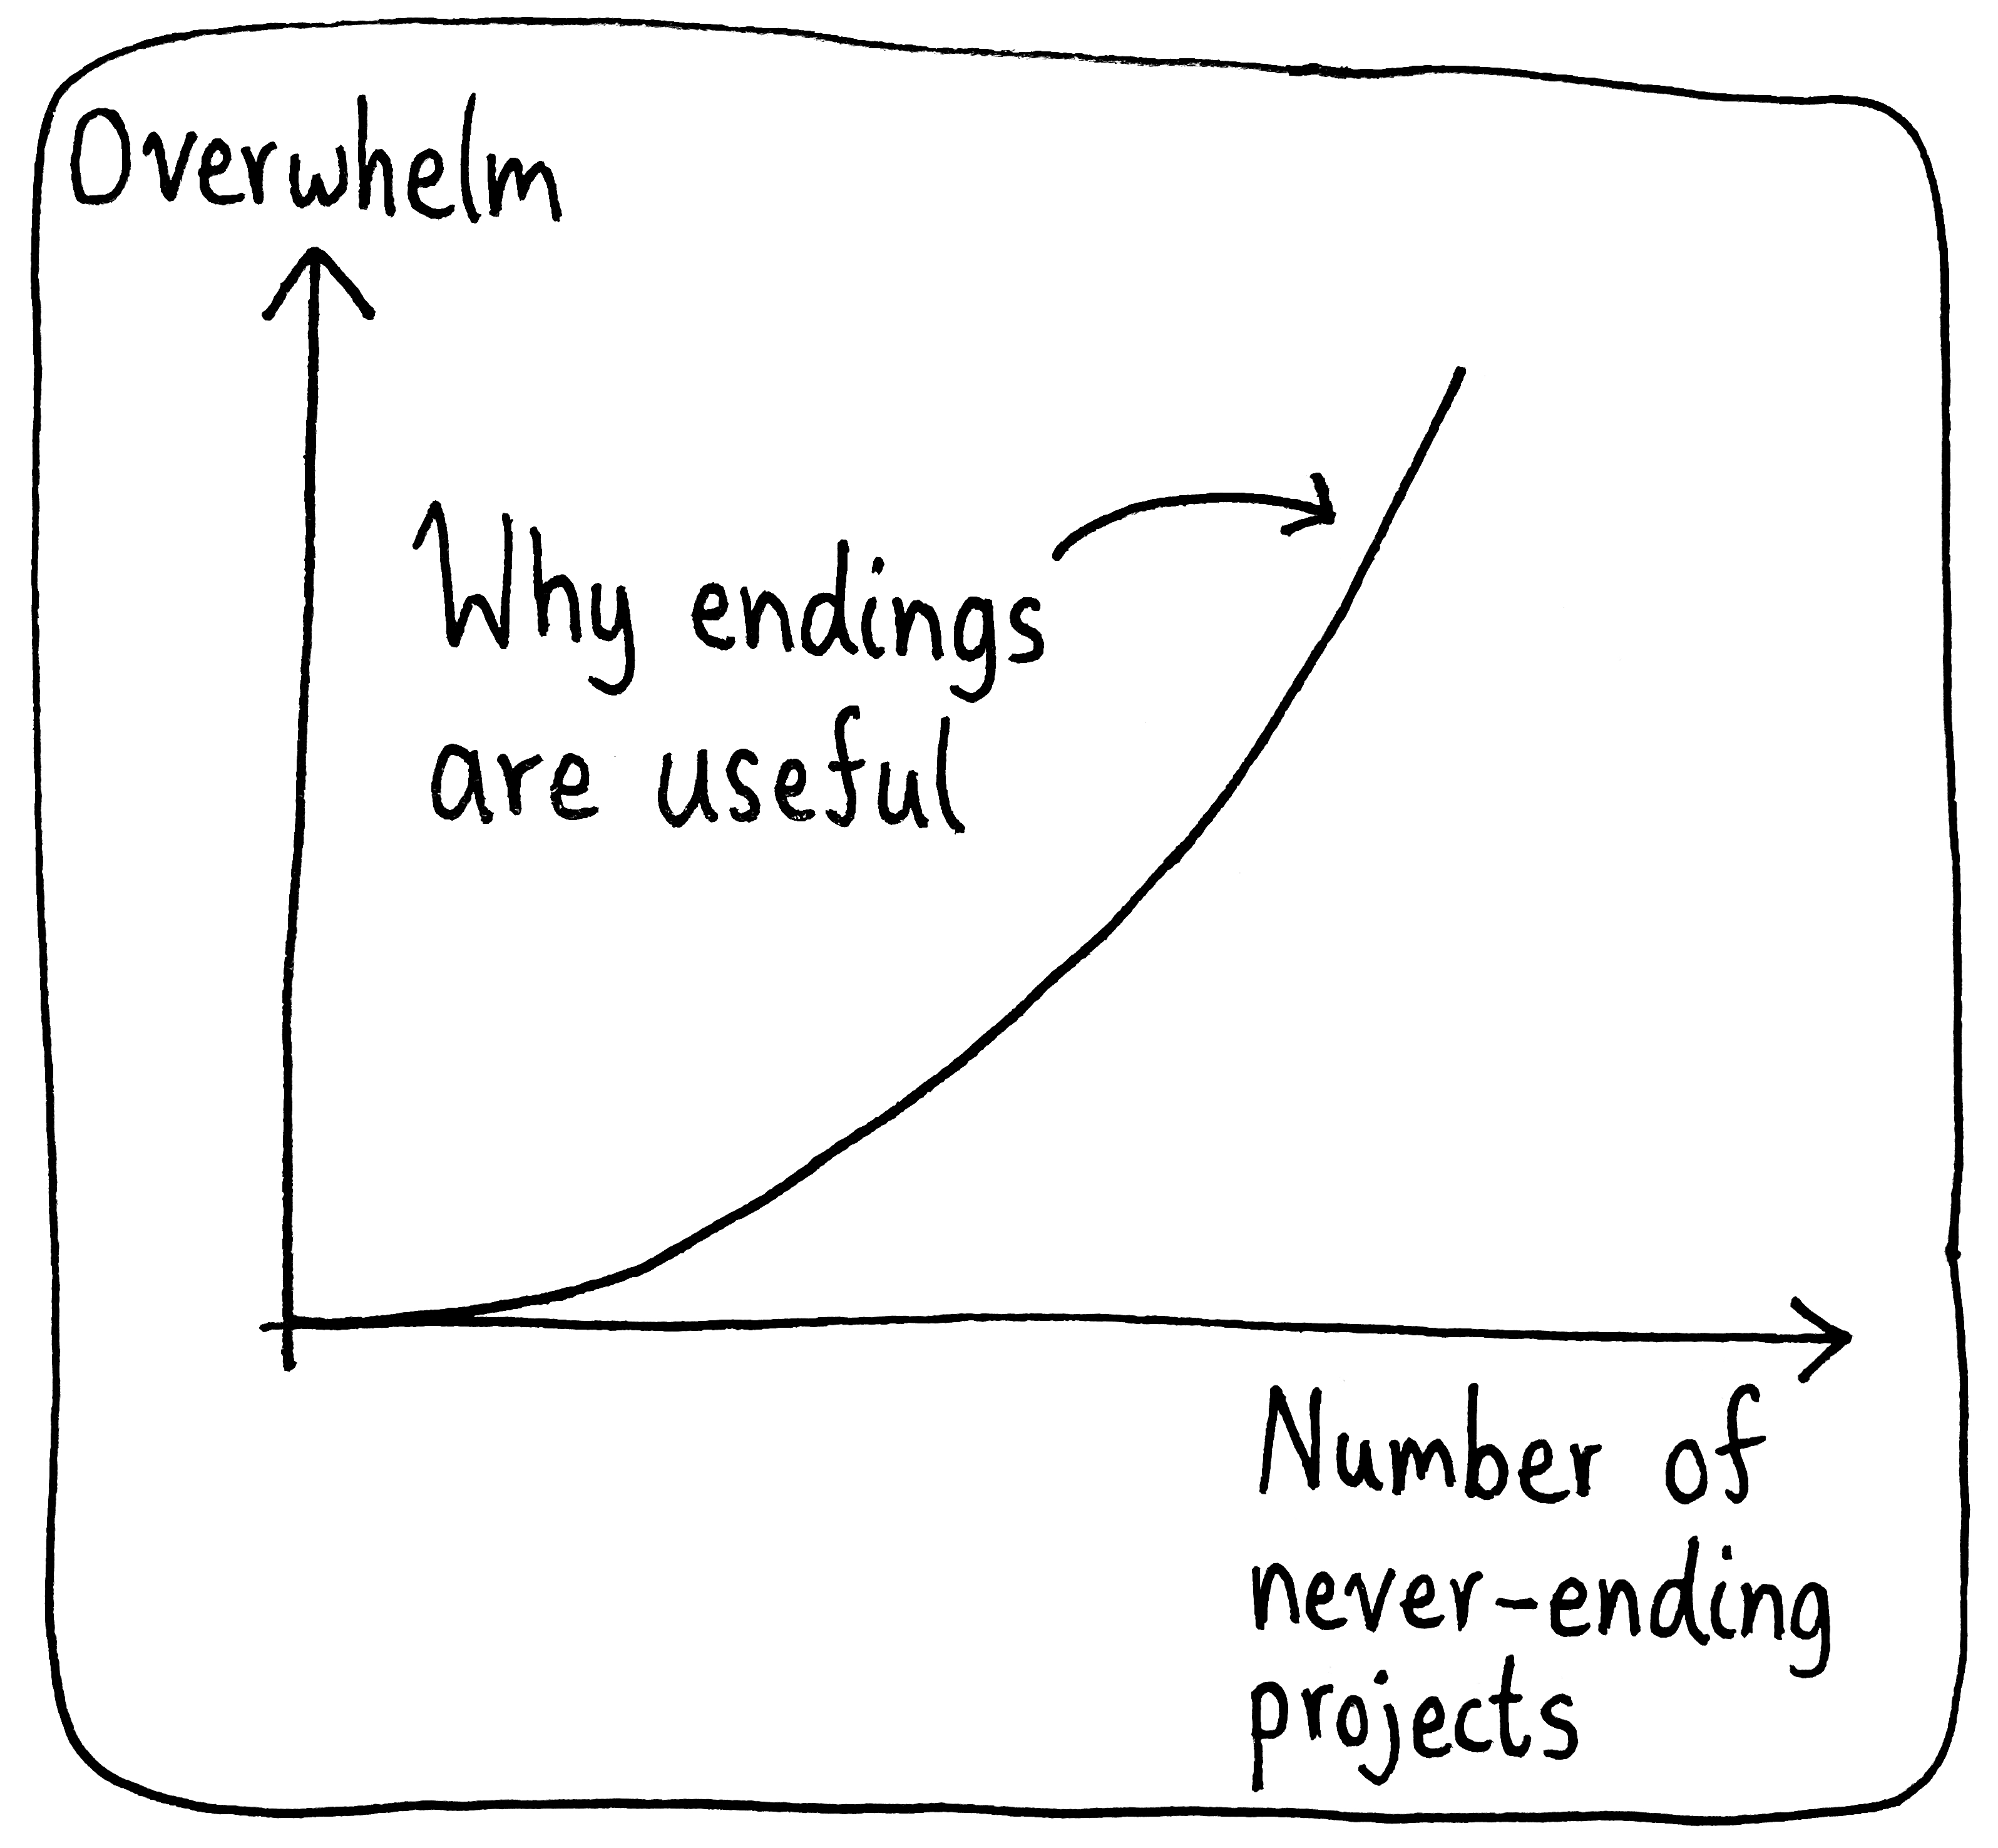 A graph of the number of never-ending projects versus overwhelm. The curve rapidly increases without bound. There's an arrow pointing to the curve at high overwhelm which says, "Why endings are useful."